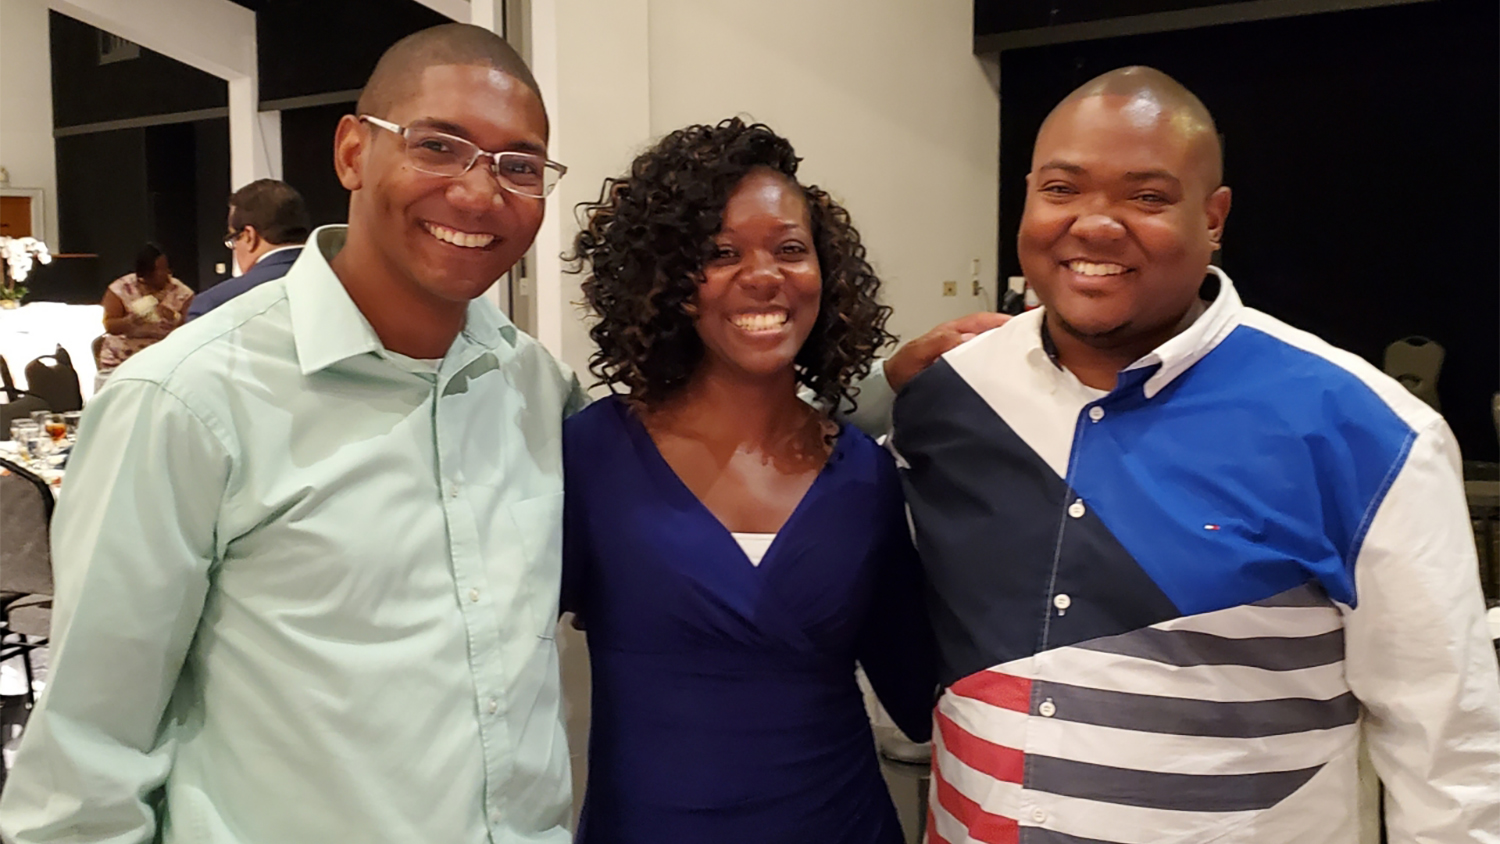 White standing between her brothers, Michael (to her left) and Marcus (to her right) at a family event.